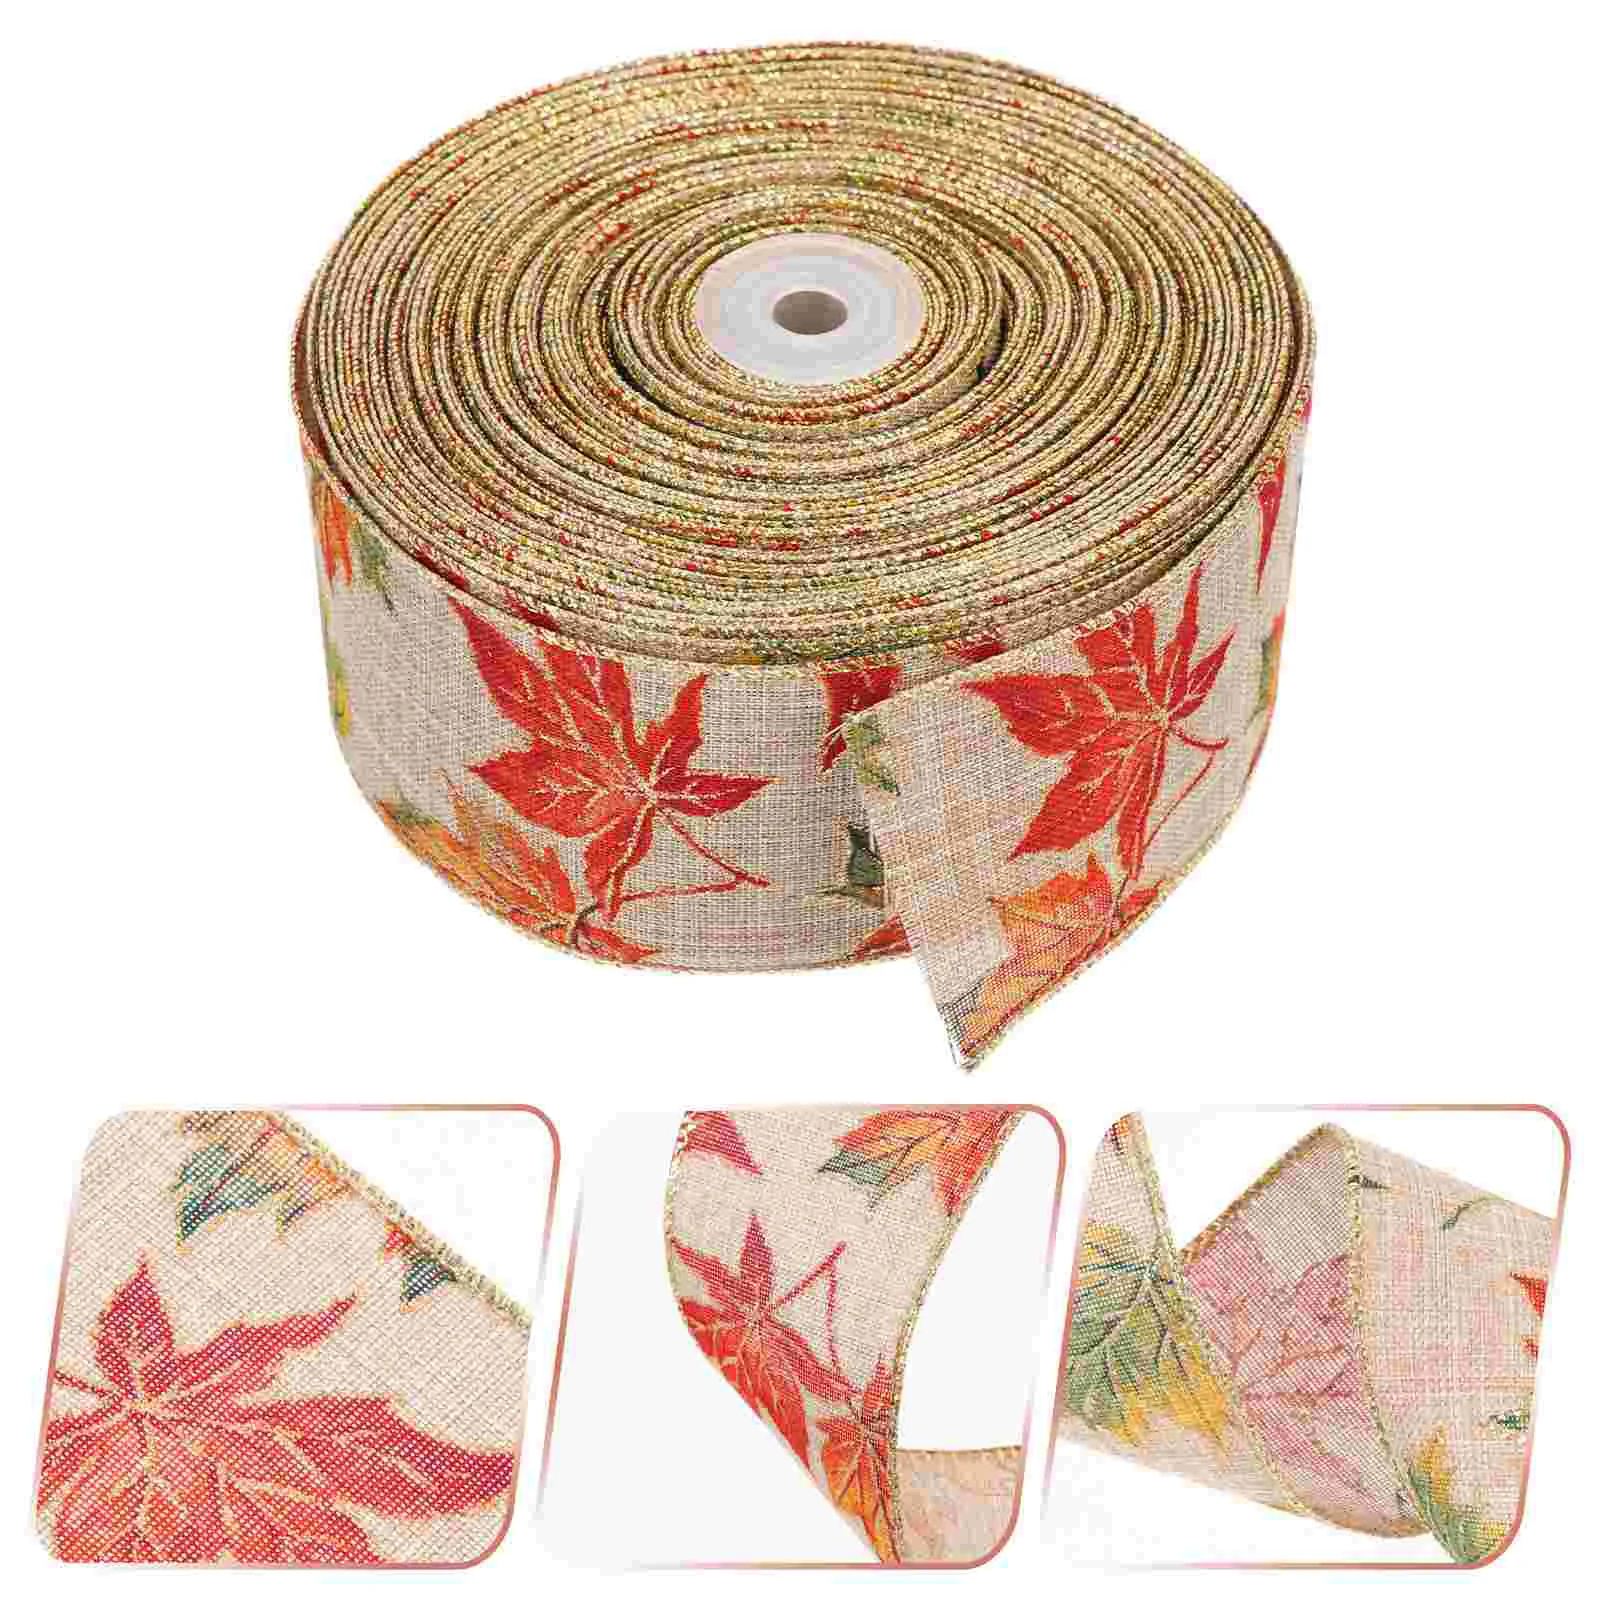 

Ribbon Fall Wired Gift Burlap Present Craft Packing Rolls Wrap Function Multi Cuttable Festival Convenient Polyester Wear